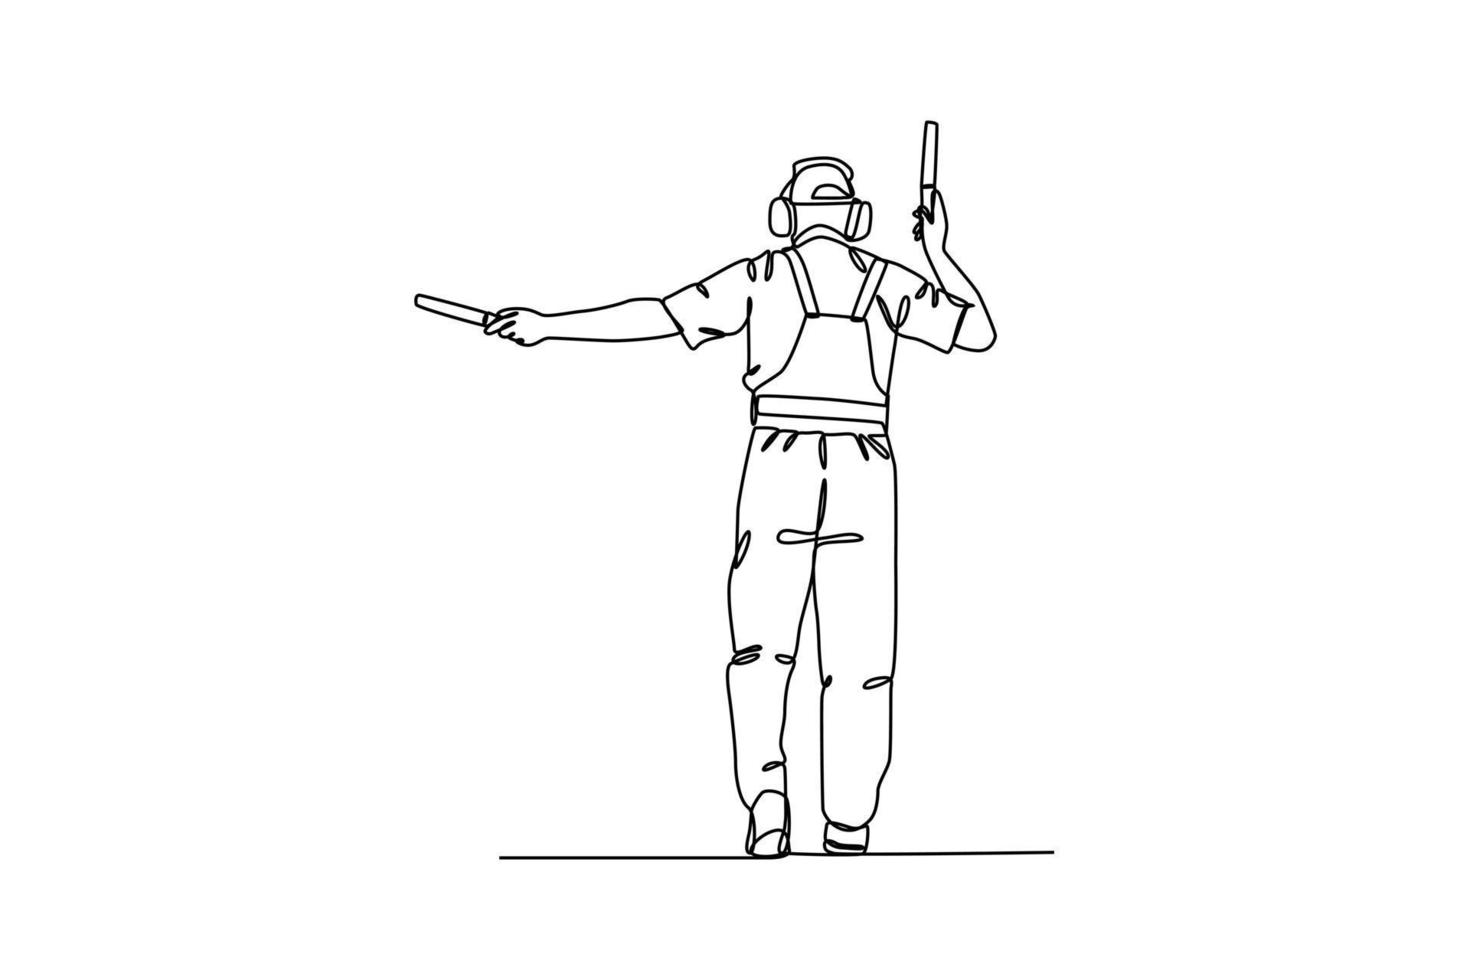 Continuous one-line drawing an aircraft marshaler at the airport. Airport activity concept. Single line drawing design graphic vector illustration